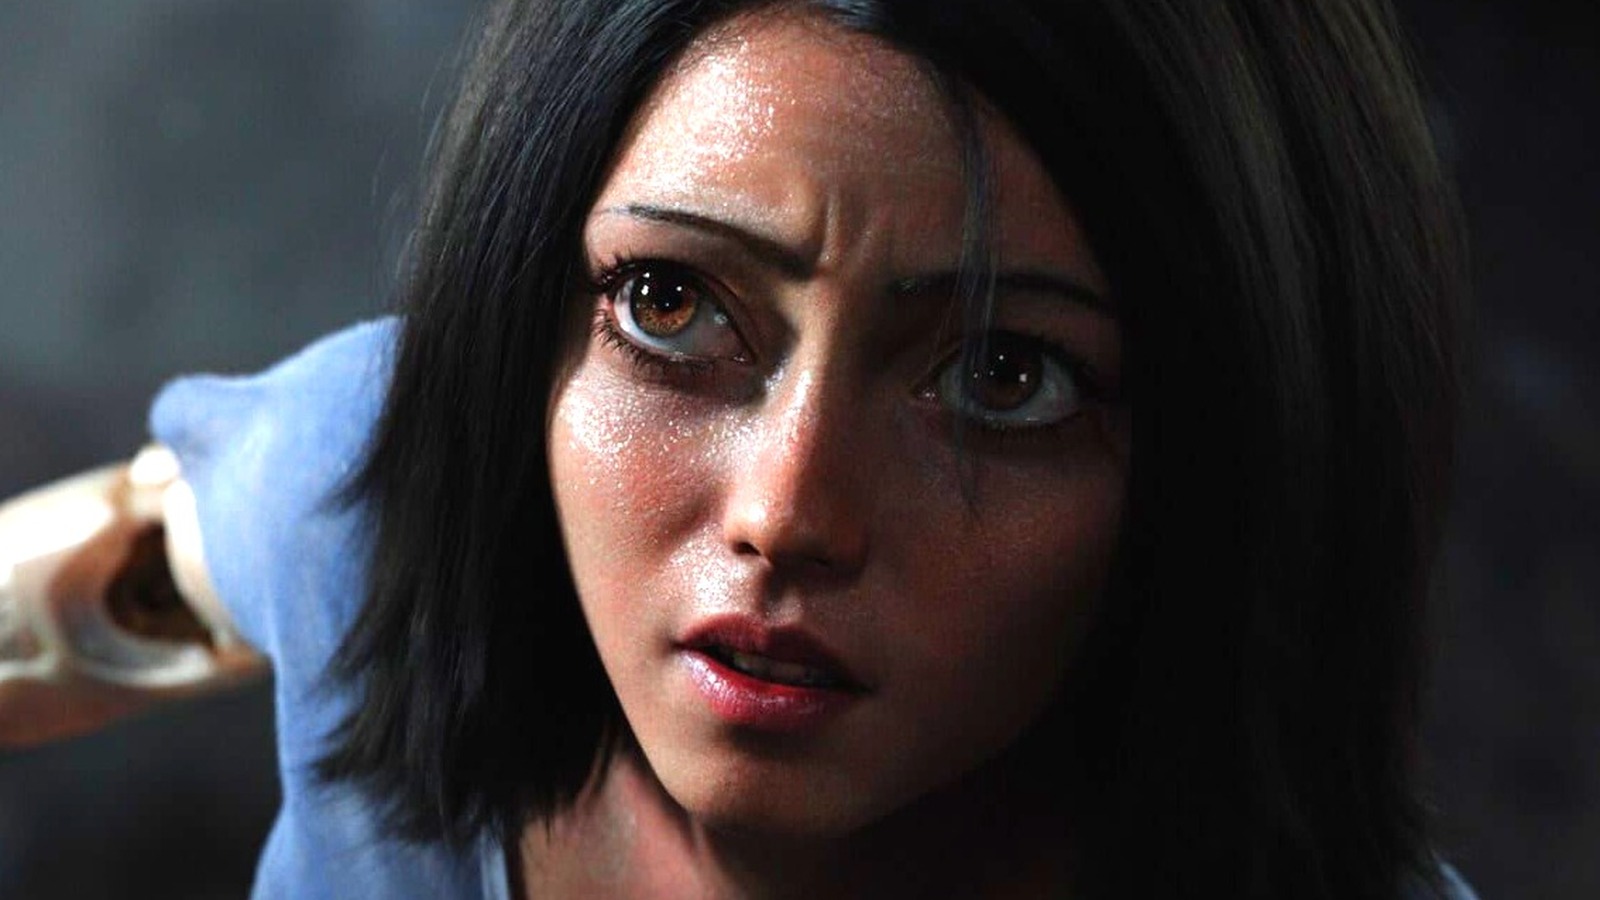 Small Details In Alita: Battle Angel Only Real Fans Notice